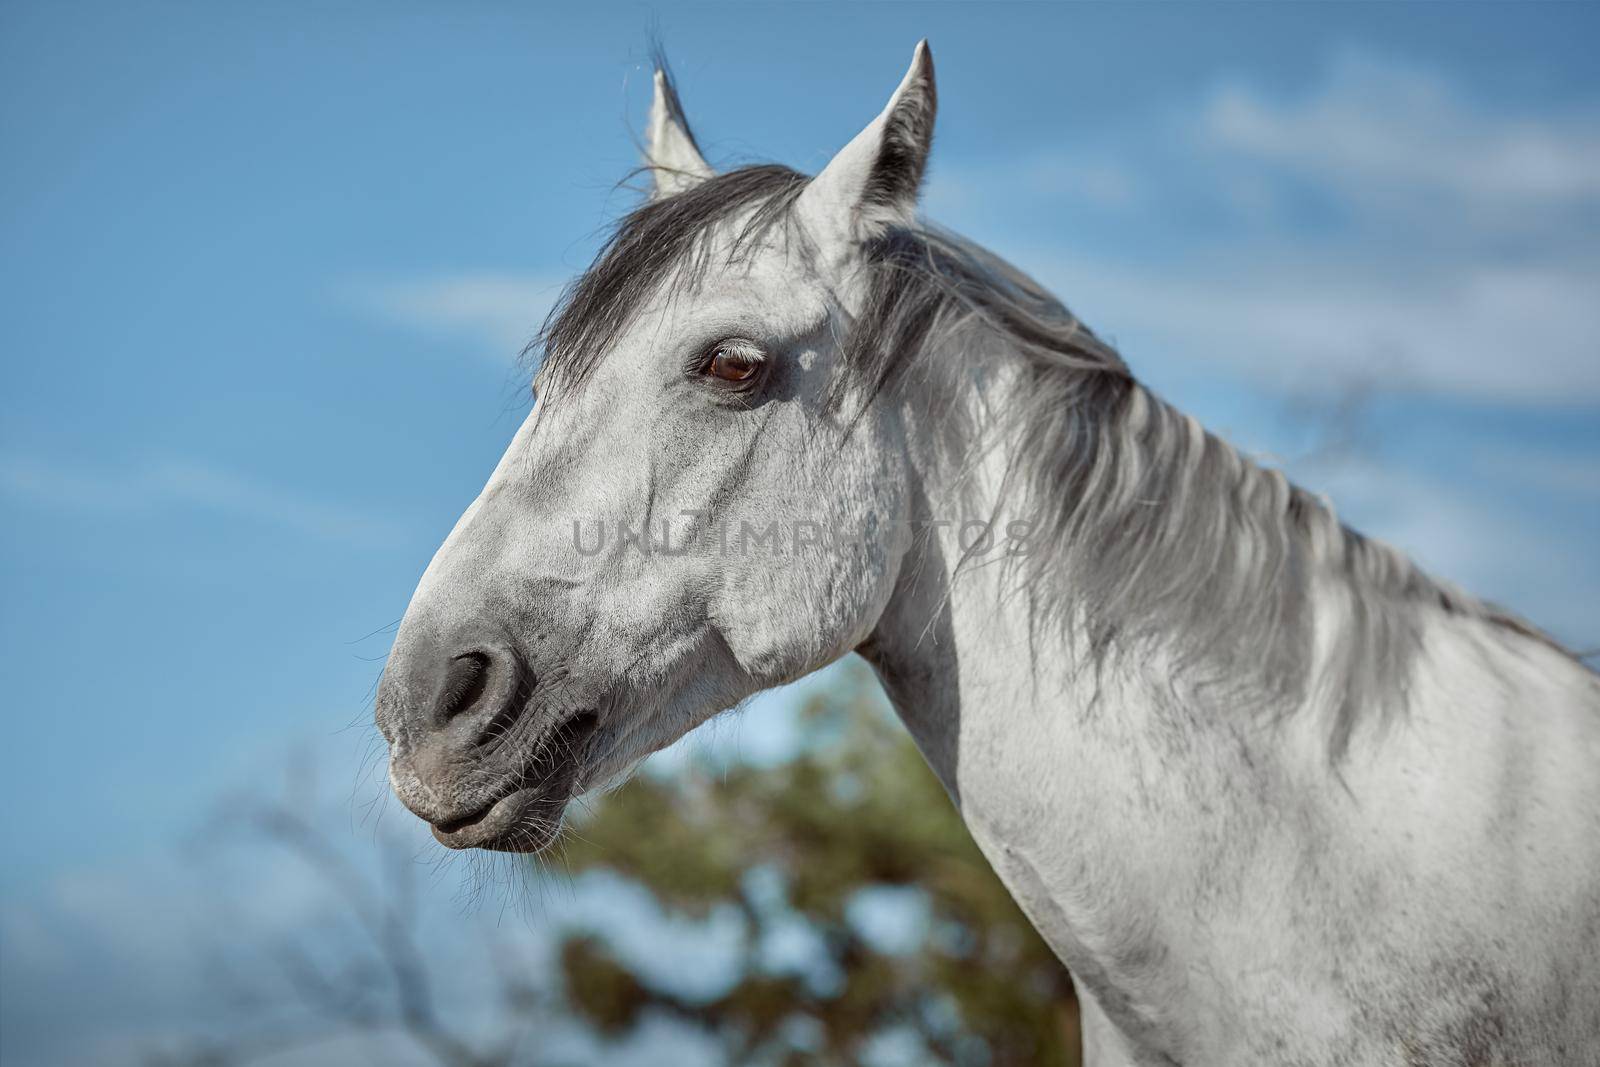 Beautiful grey horse in White Apple, close-up of muzzle, cute look, mane, background of running field, corral, trees. Horses are wonderful animals